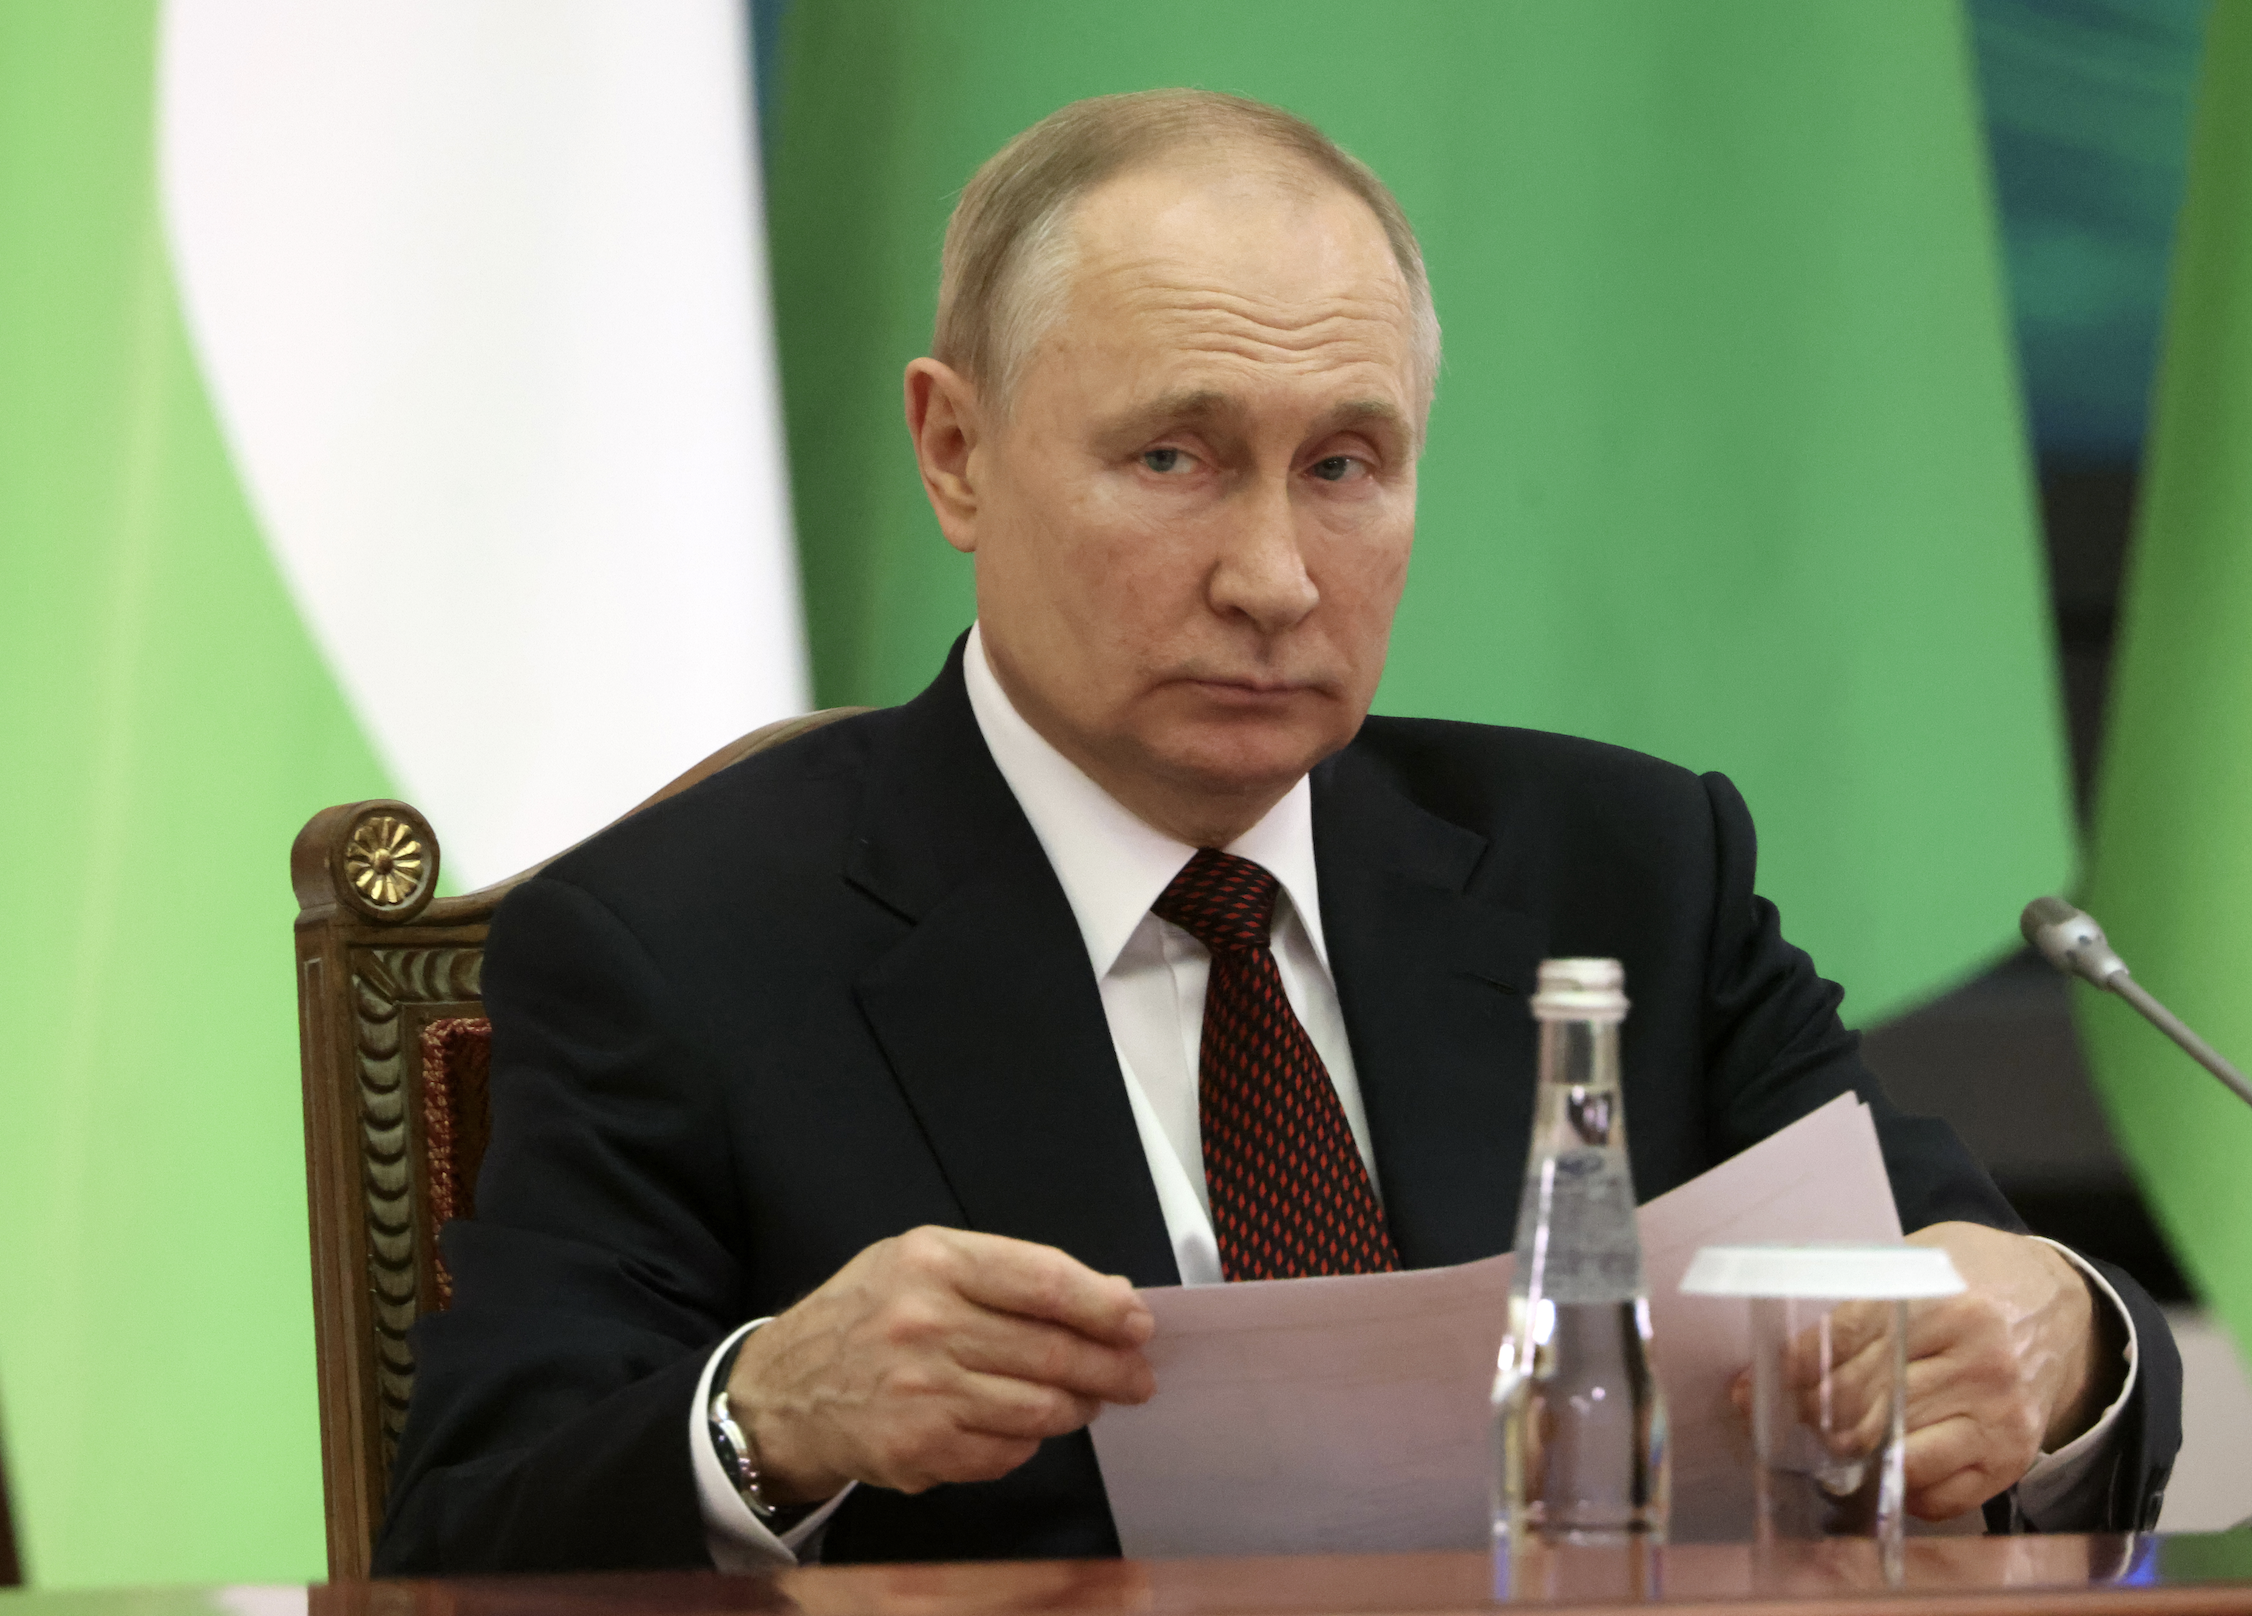 Russian President Vladimir Putin sitting at a table holding papers and not smiling.